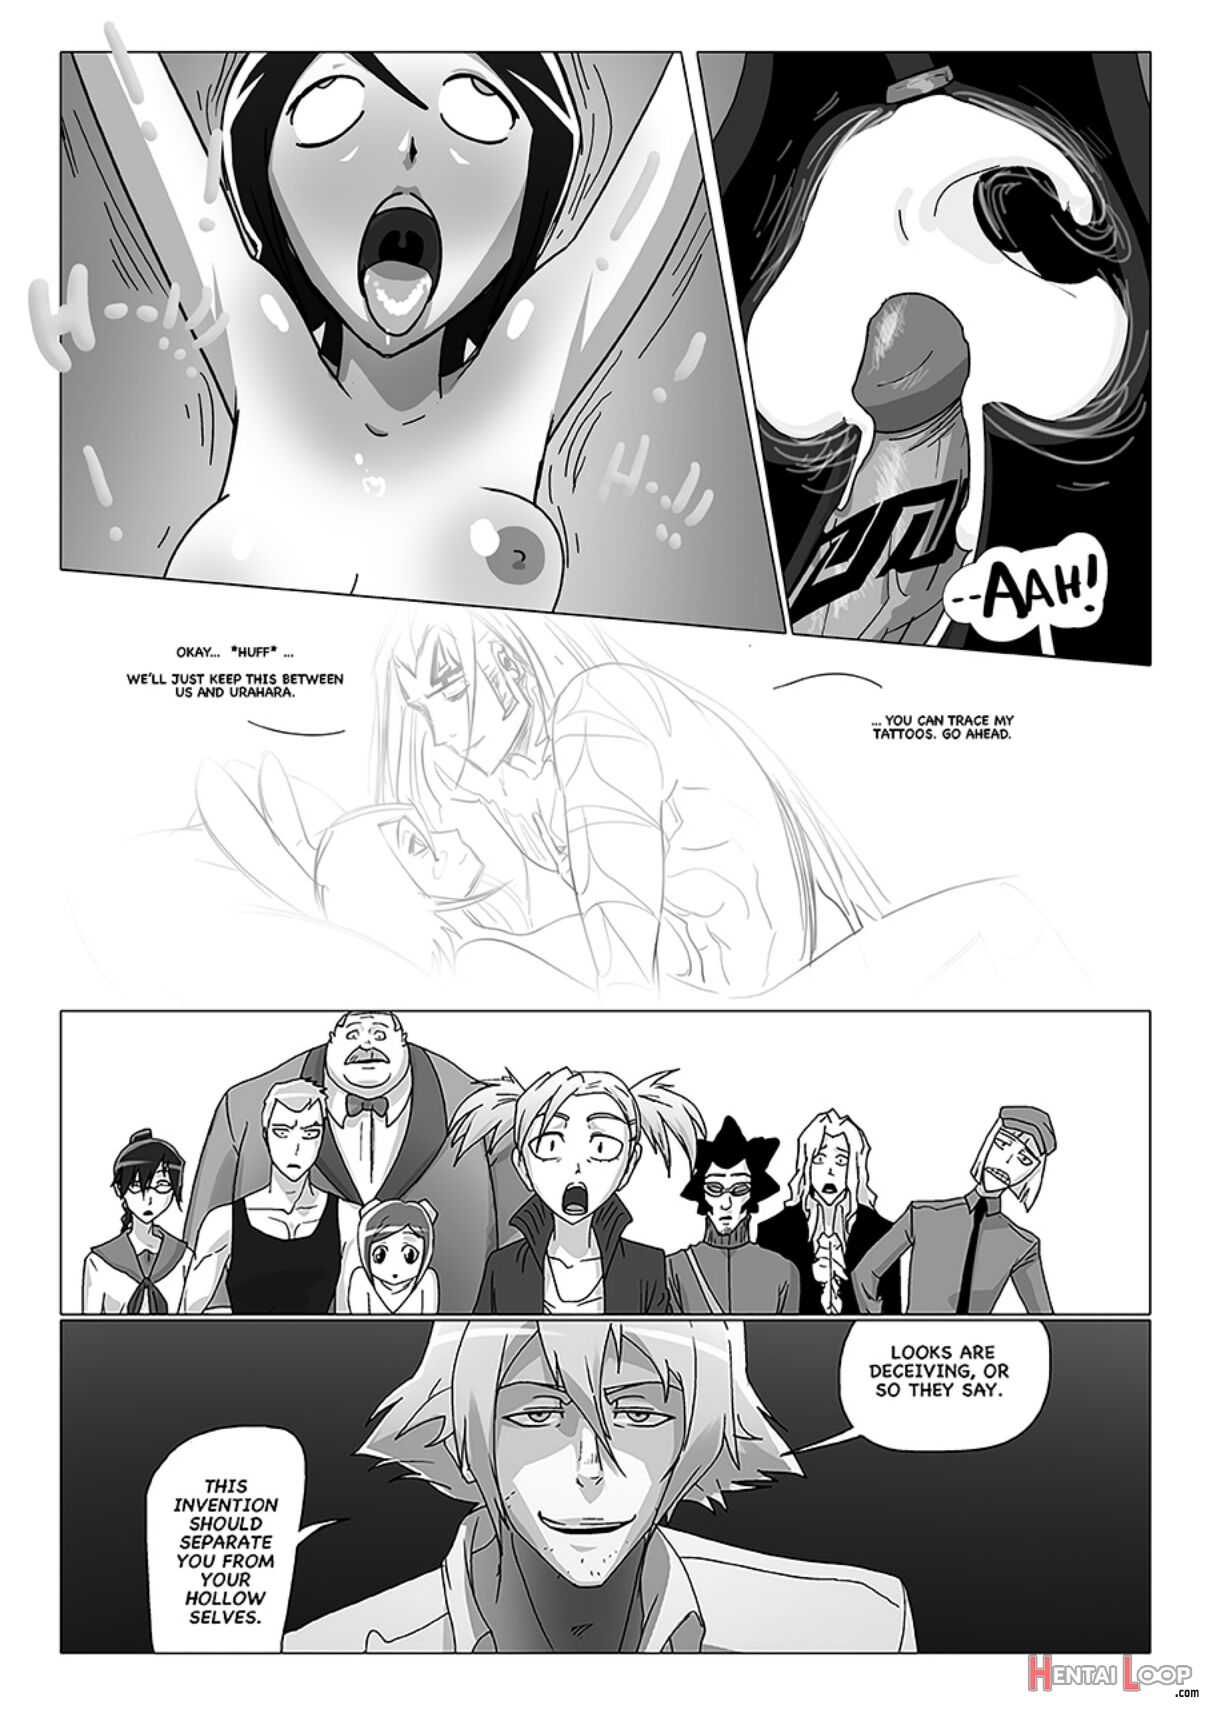 Happy To Serve You - Xxx Version page 224